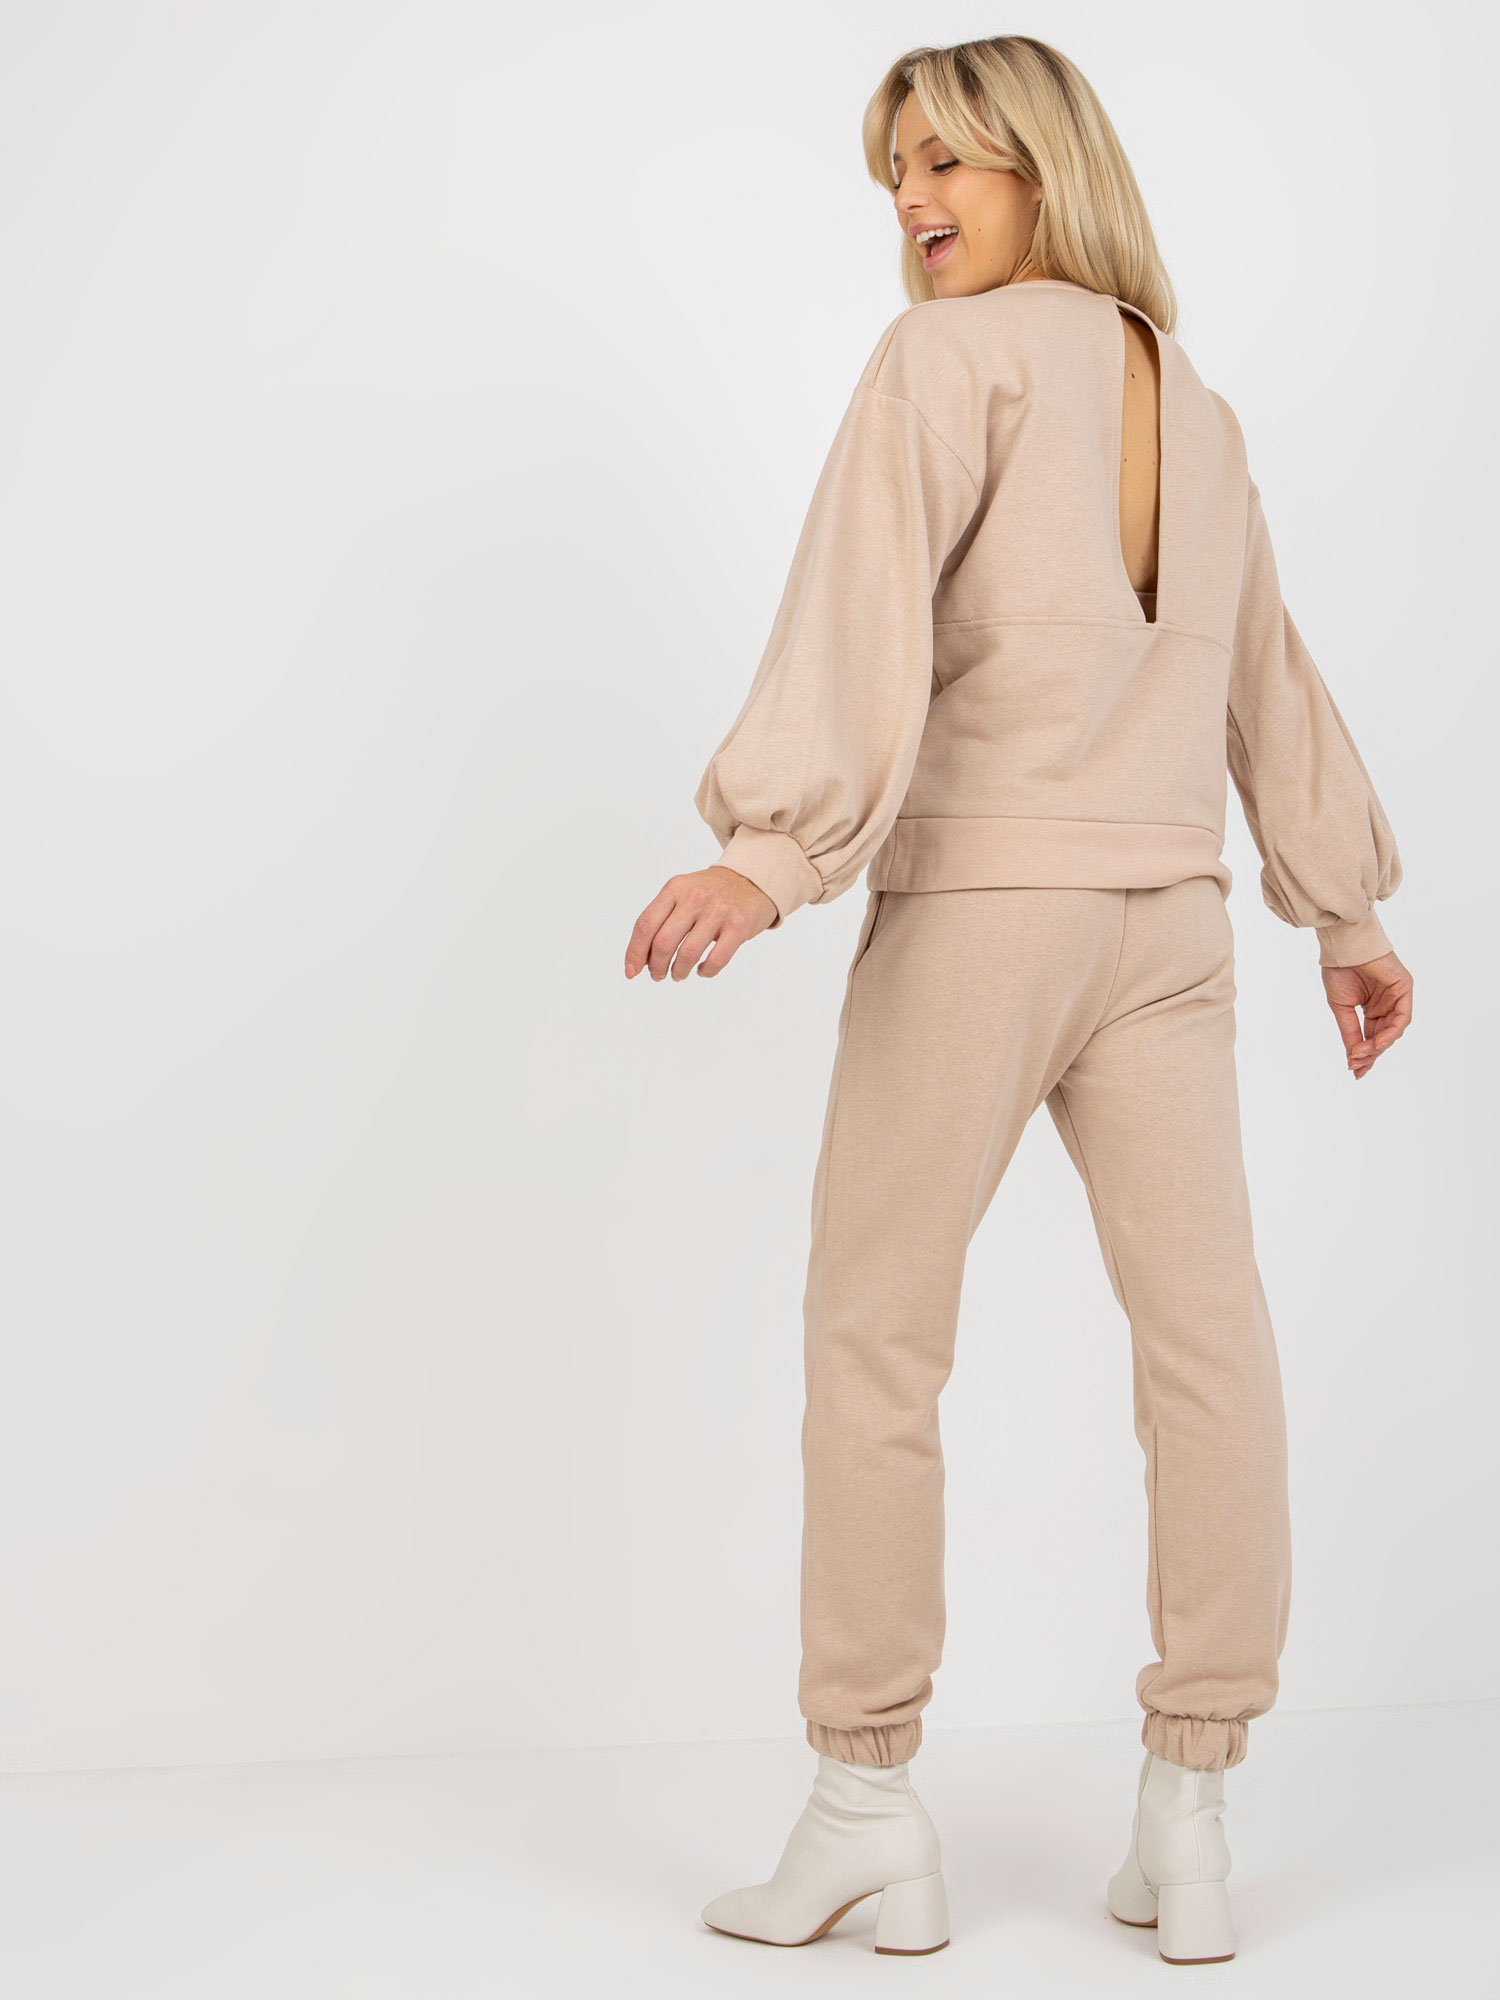 Beige casual ensemble with blouse with wide sleeves